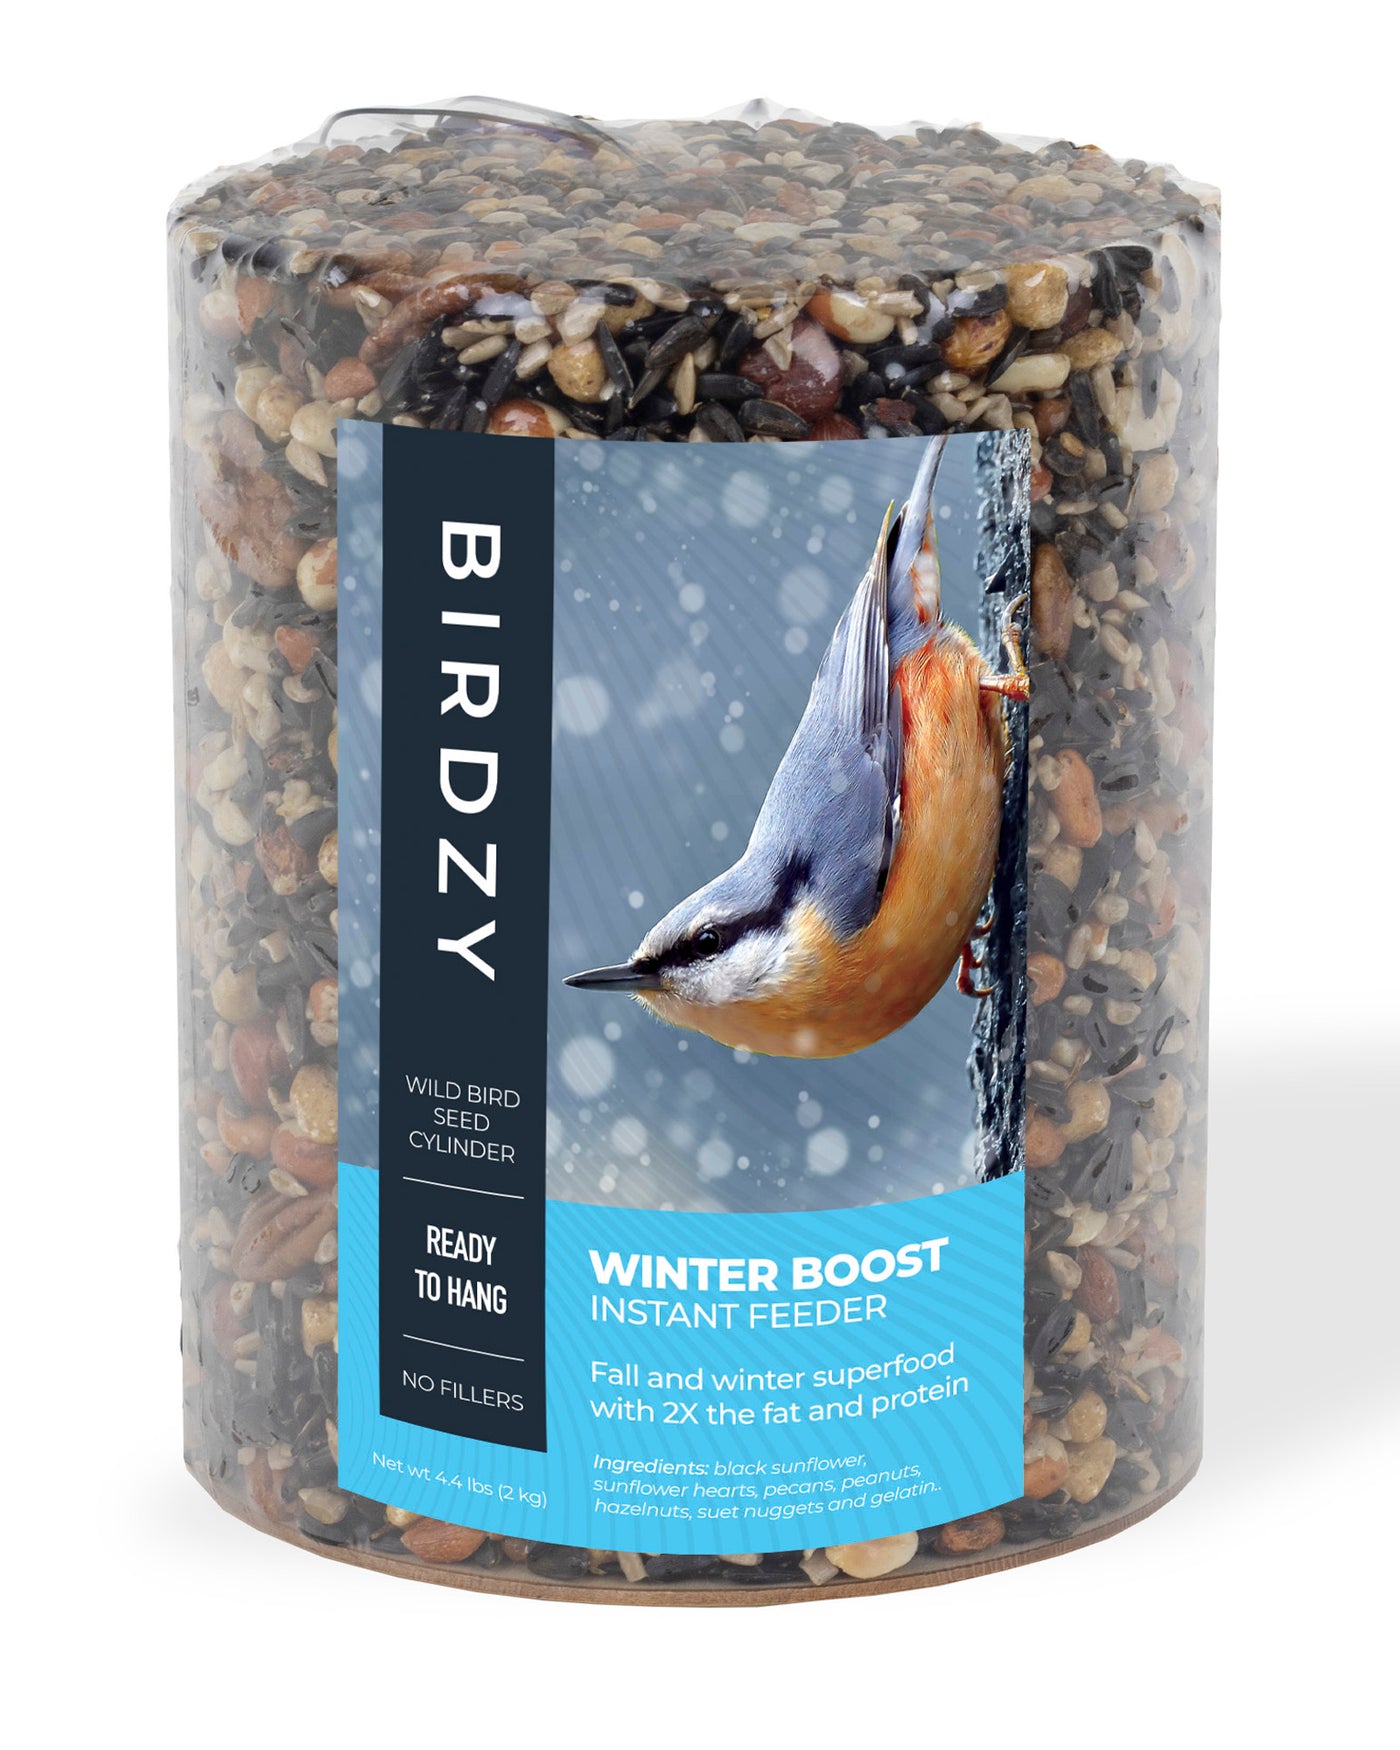 Winter Boost Seed Cylinder